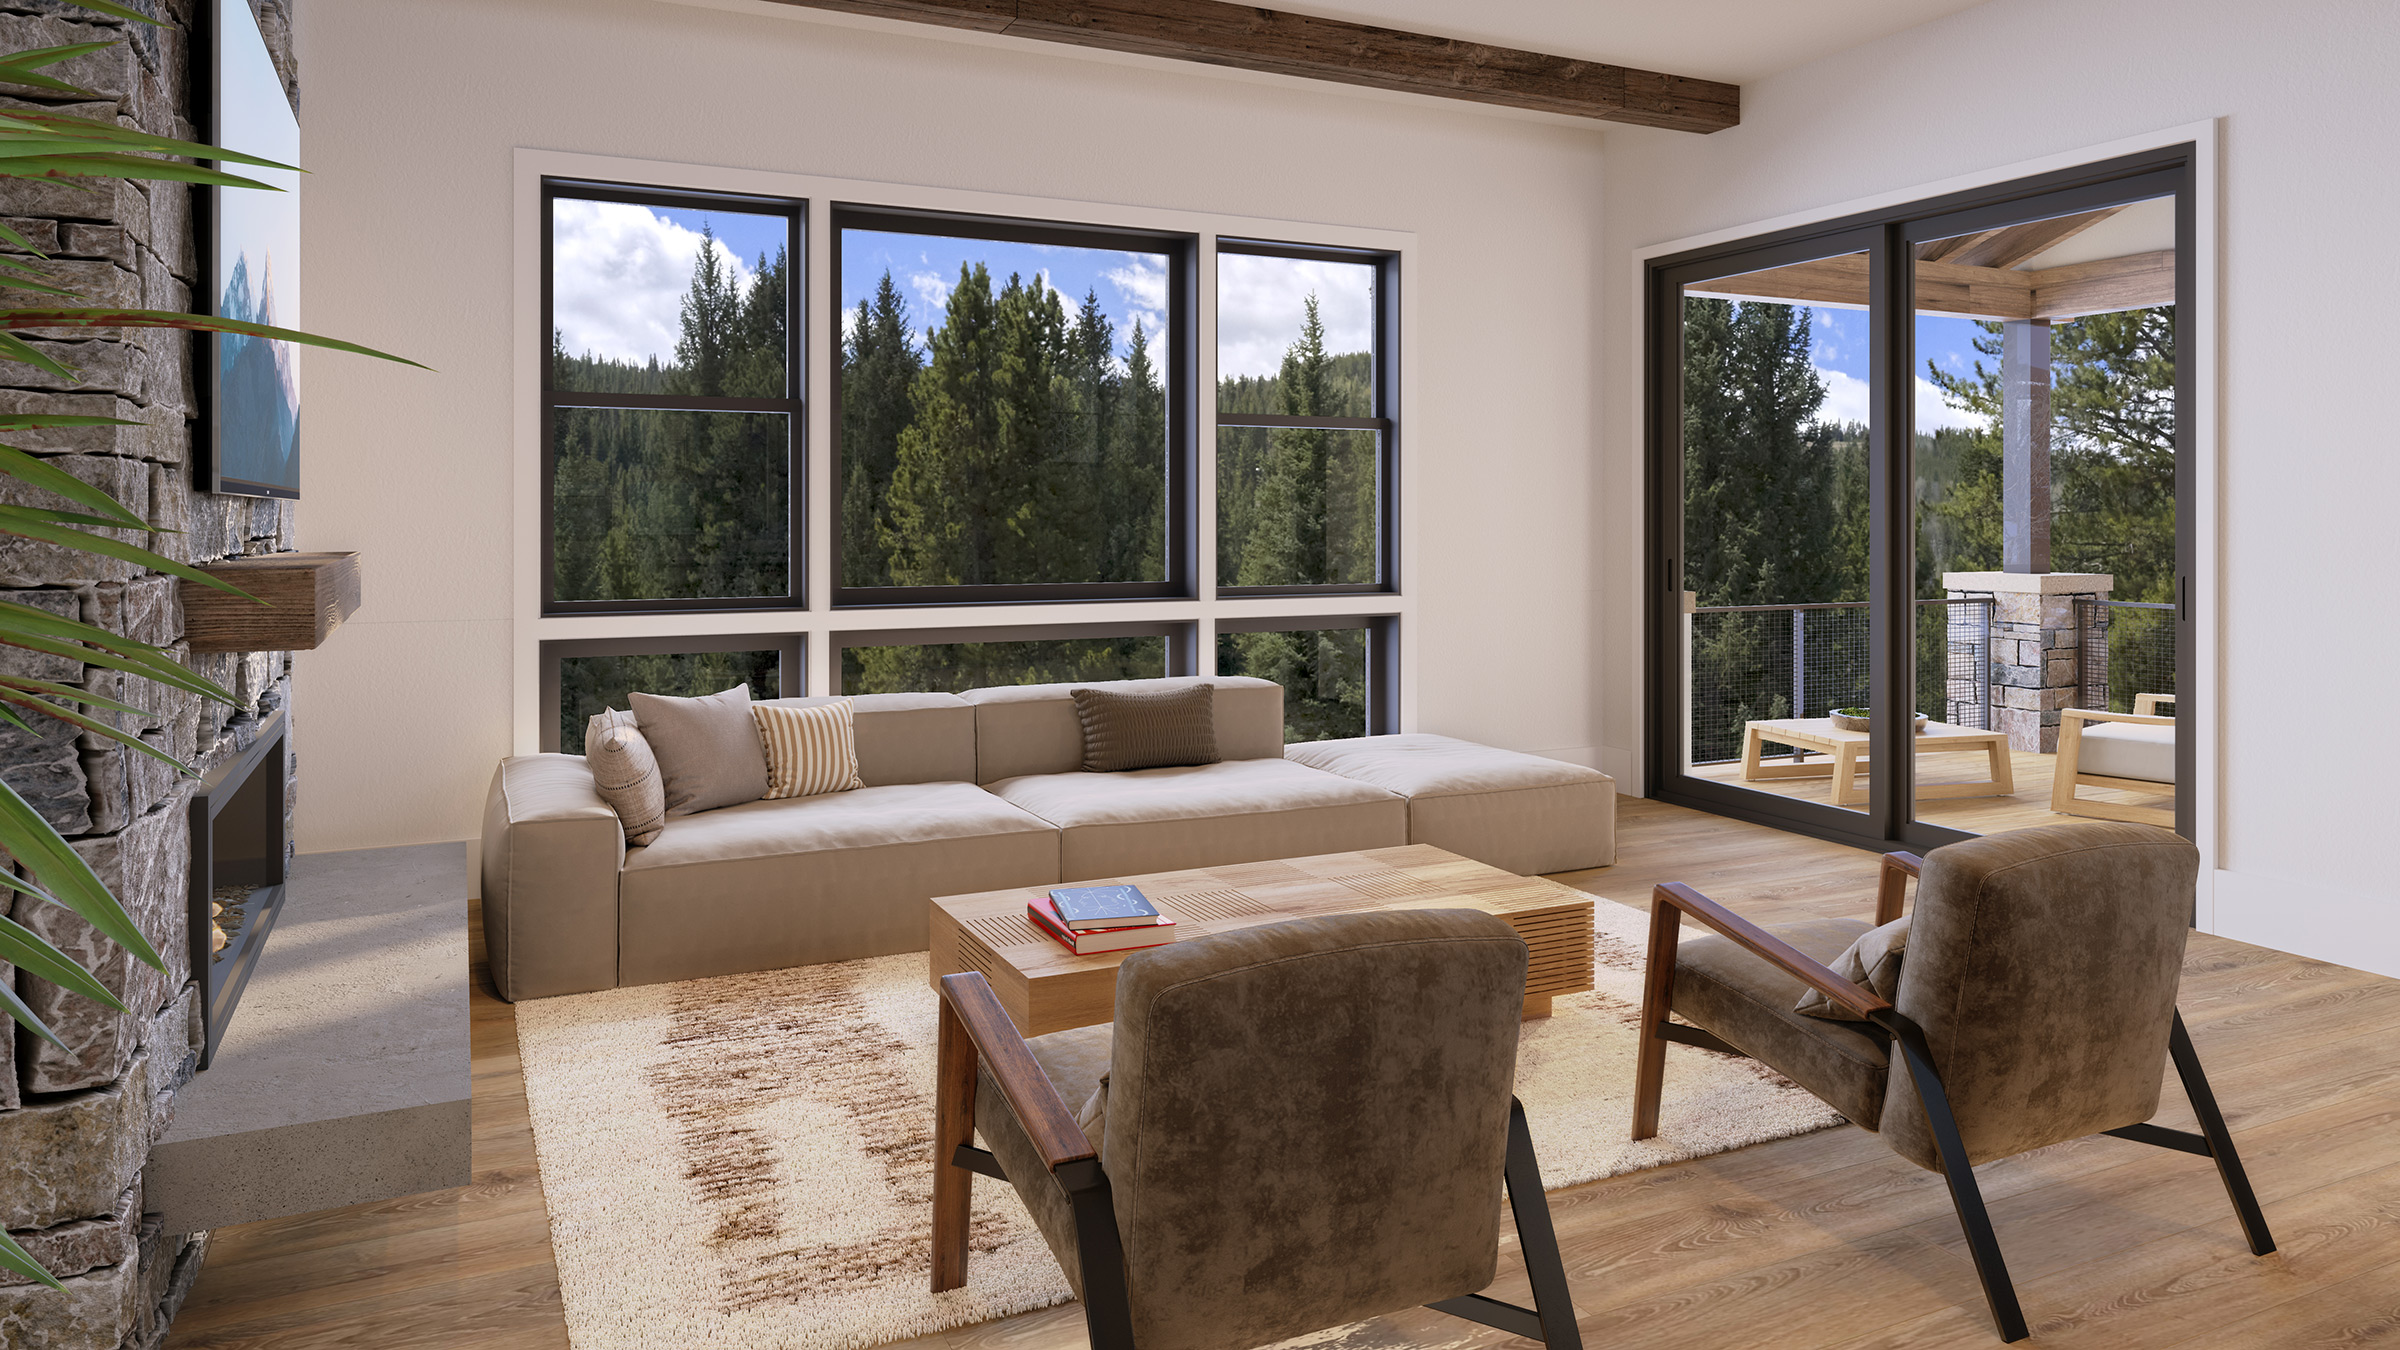 Large windows and sliding glass doors bring nature into the home.